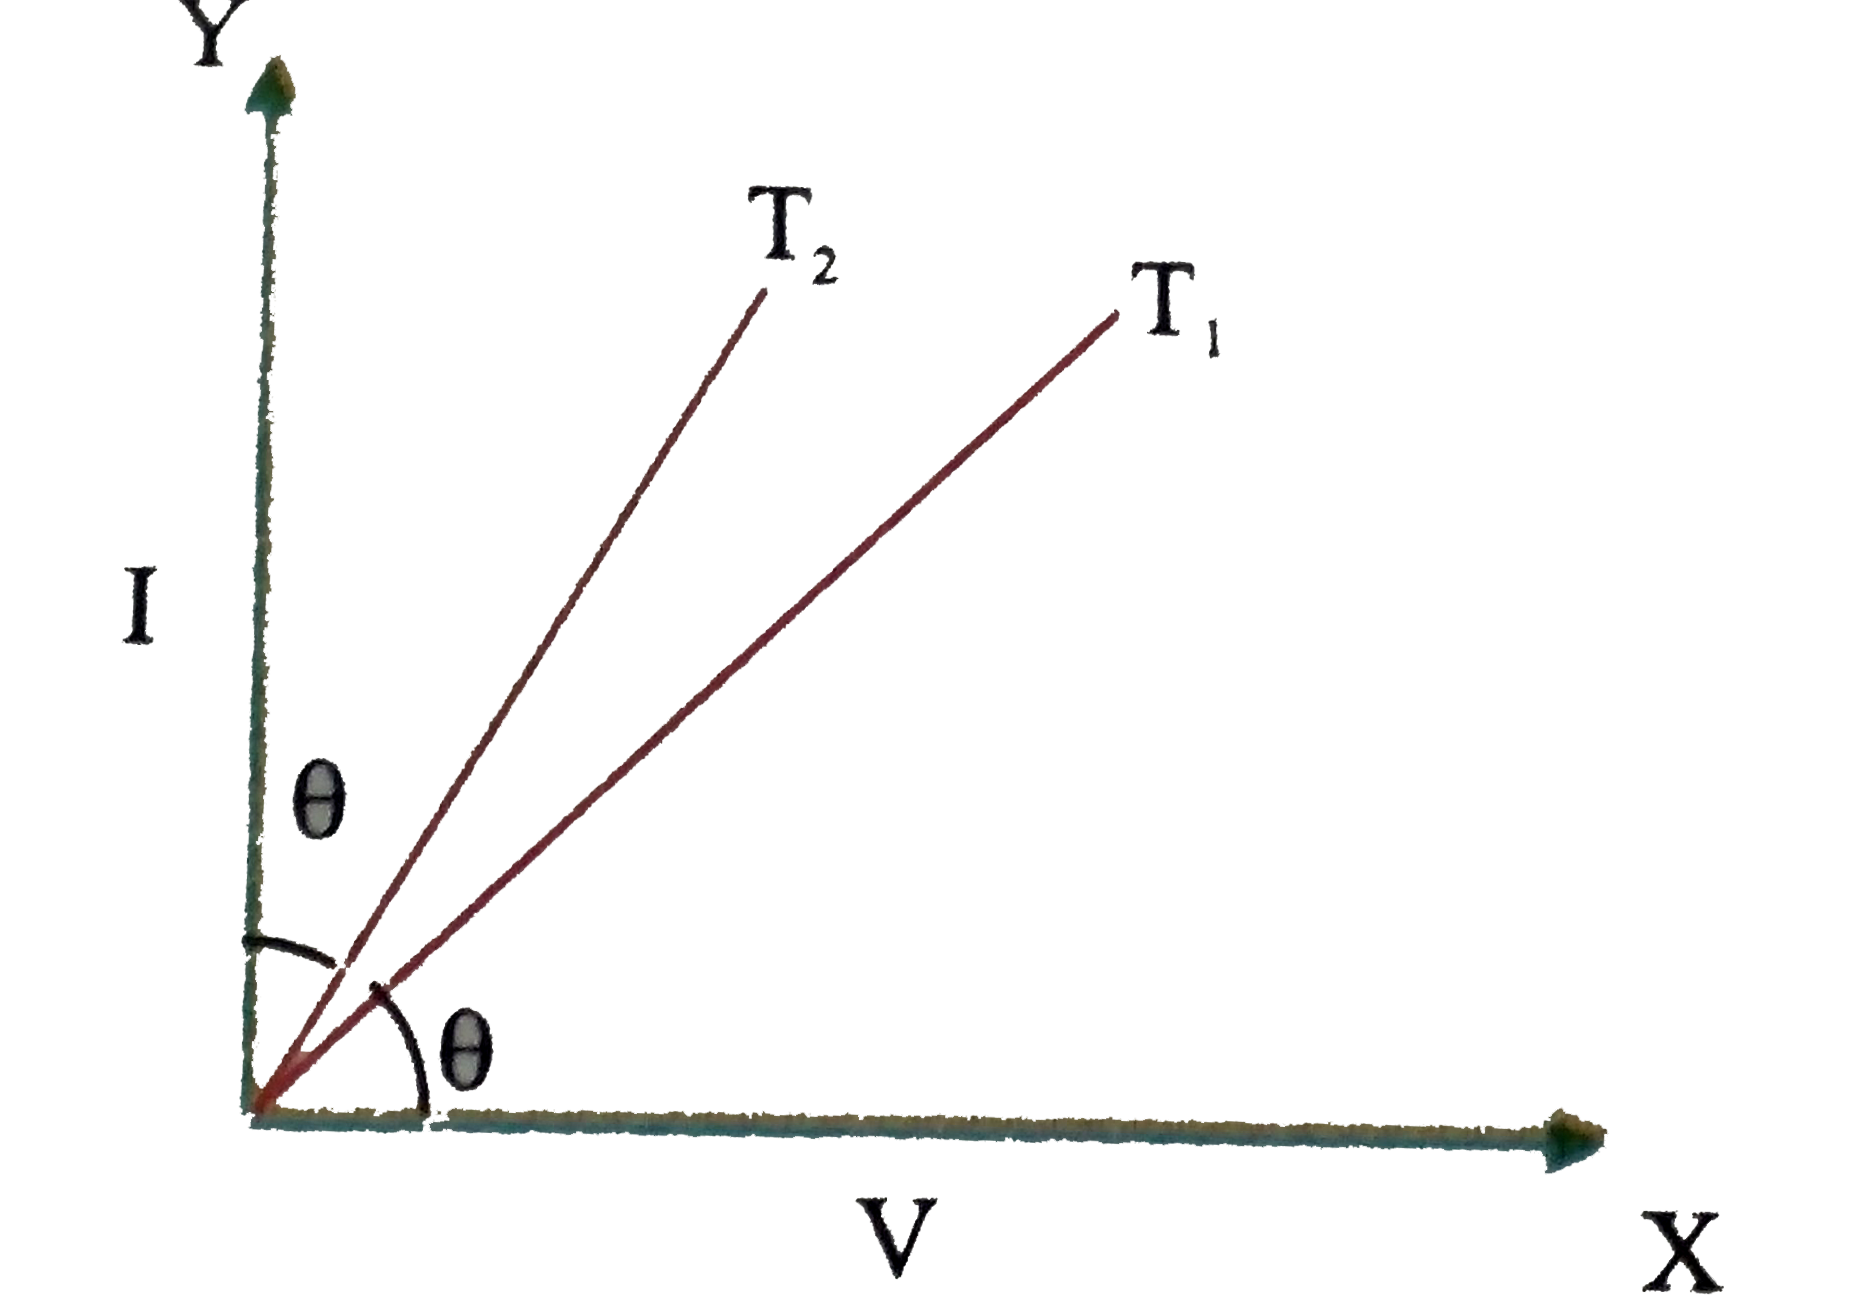 V-I graphs for a material is shown in the figure. The graphs are drawn at two different temperatures.